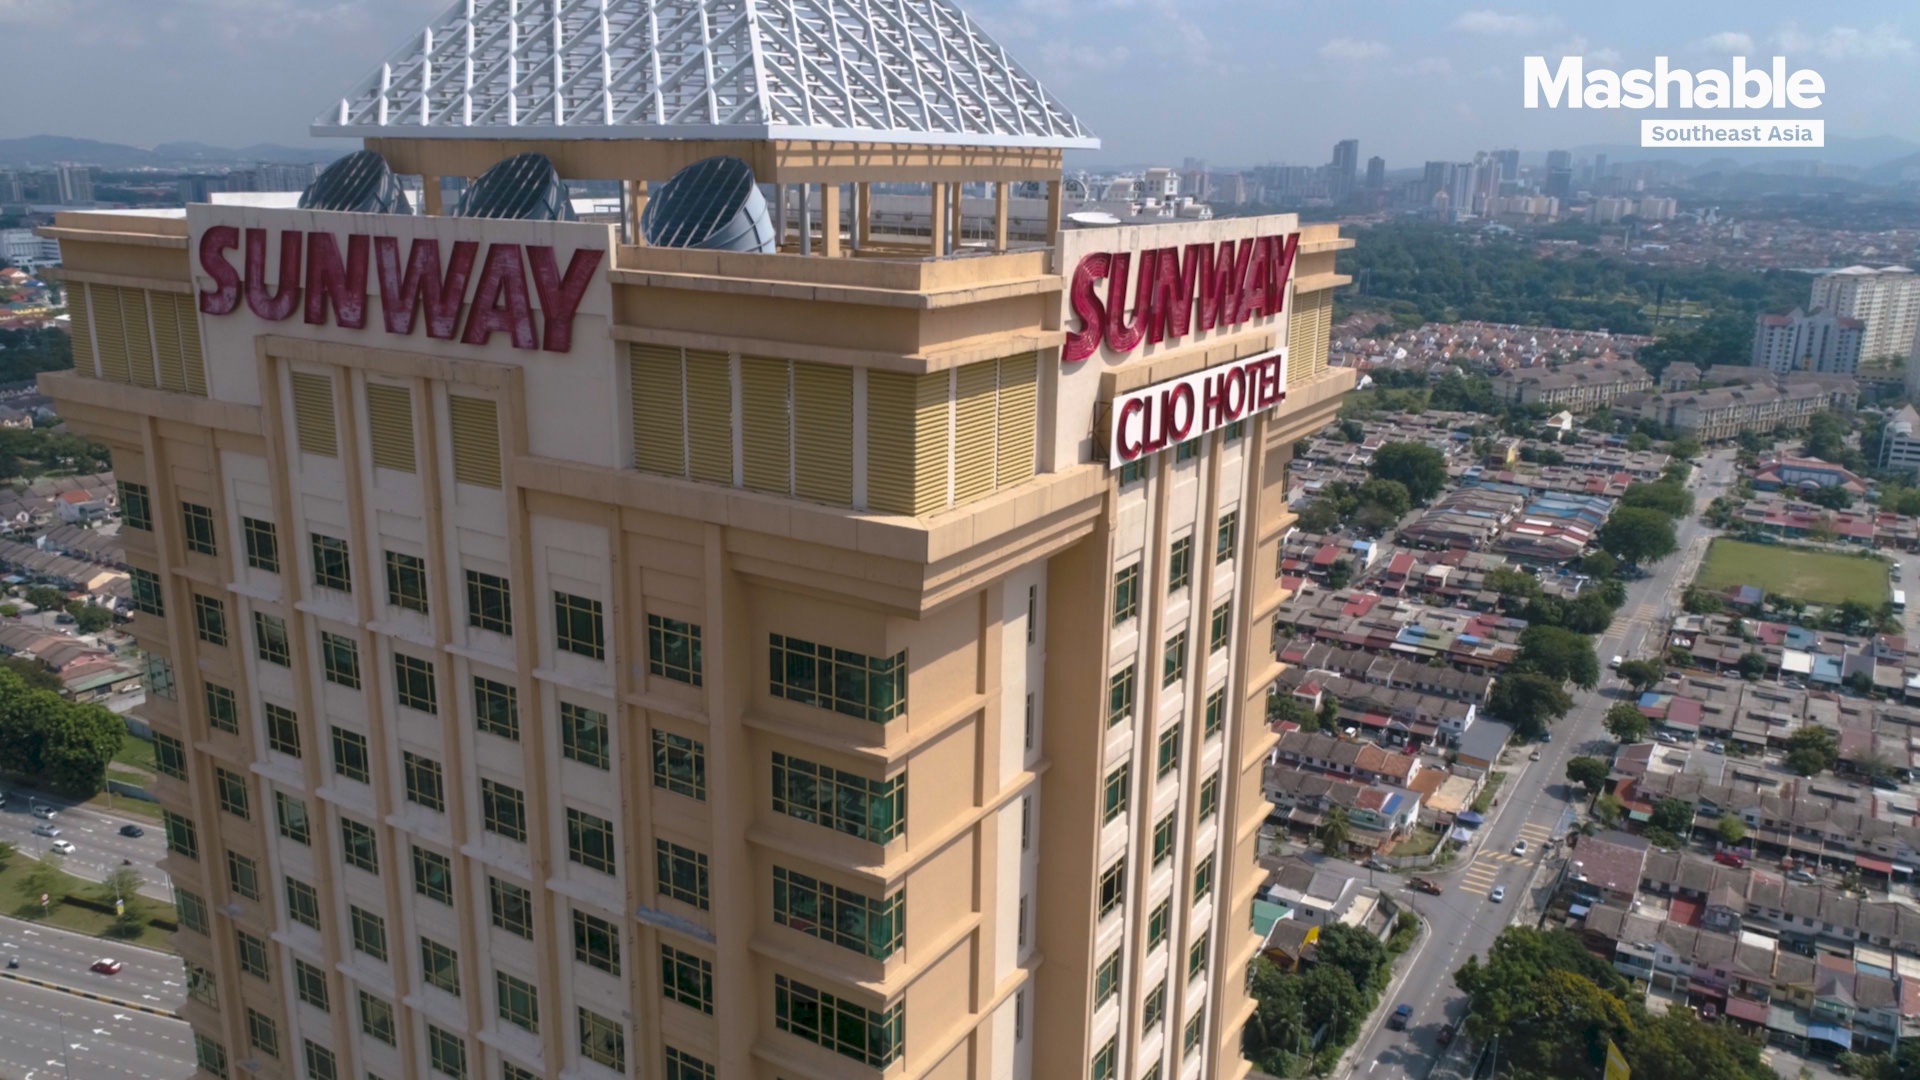 The efforts that made Sunway City Kuala Lumpur the self-sustaining city it is today